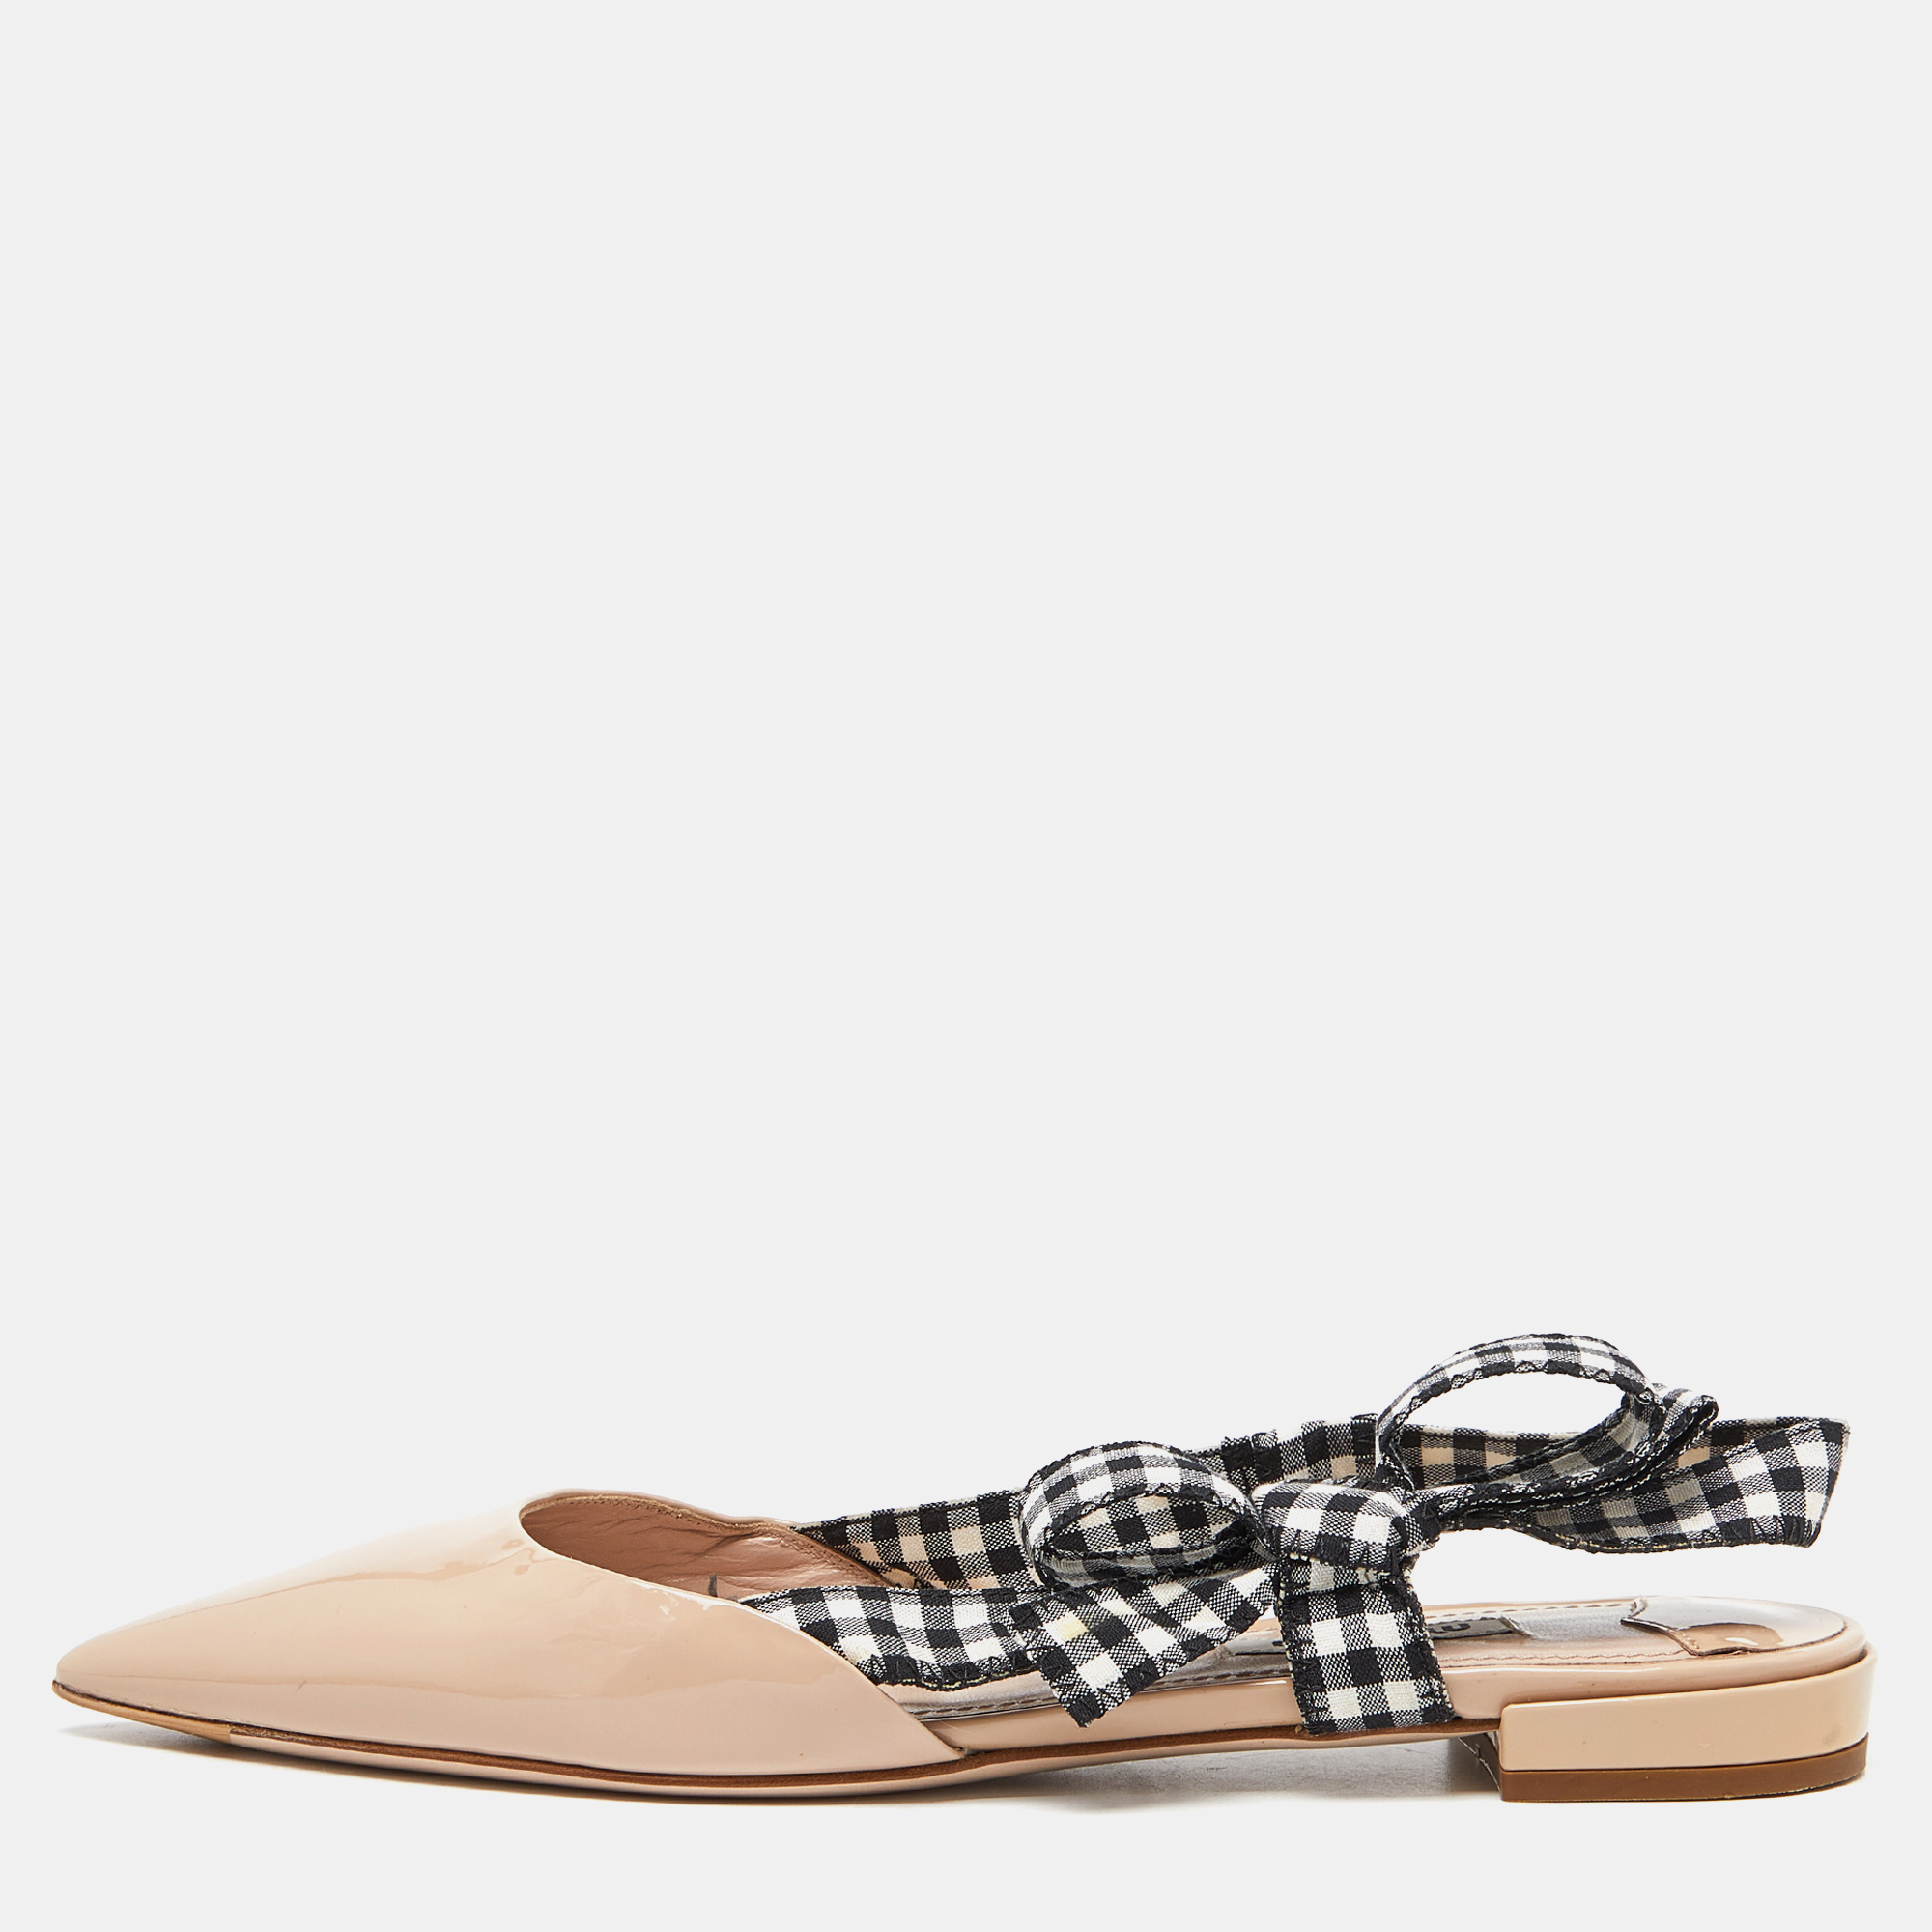 

Miu Miu Beige Patent Leather and Gingham Fabric Bow Slingback Flats Size